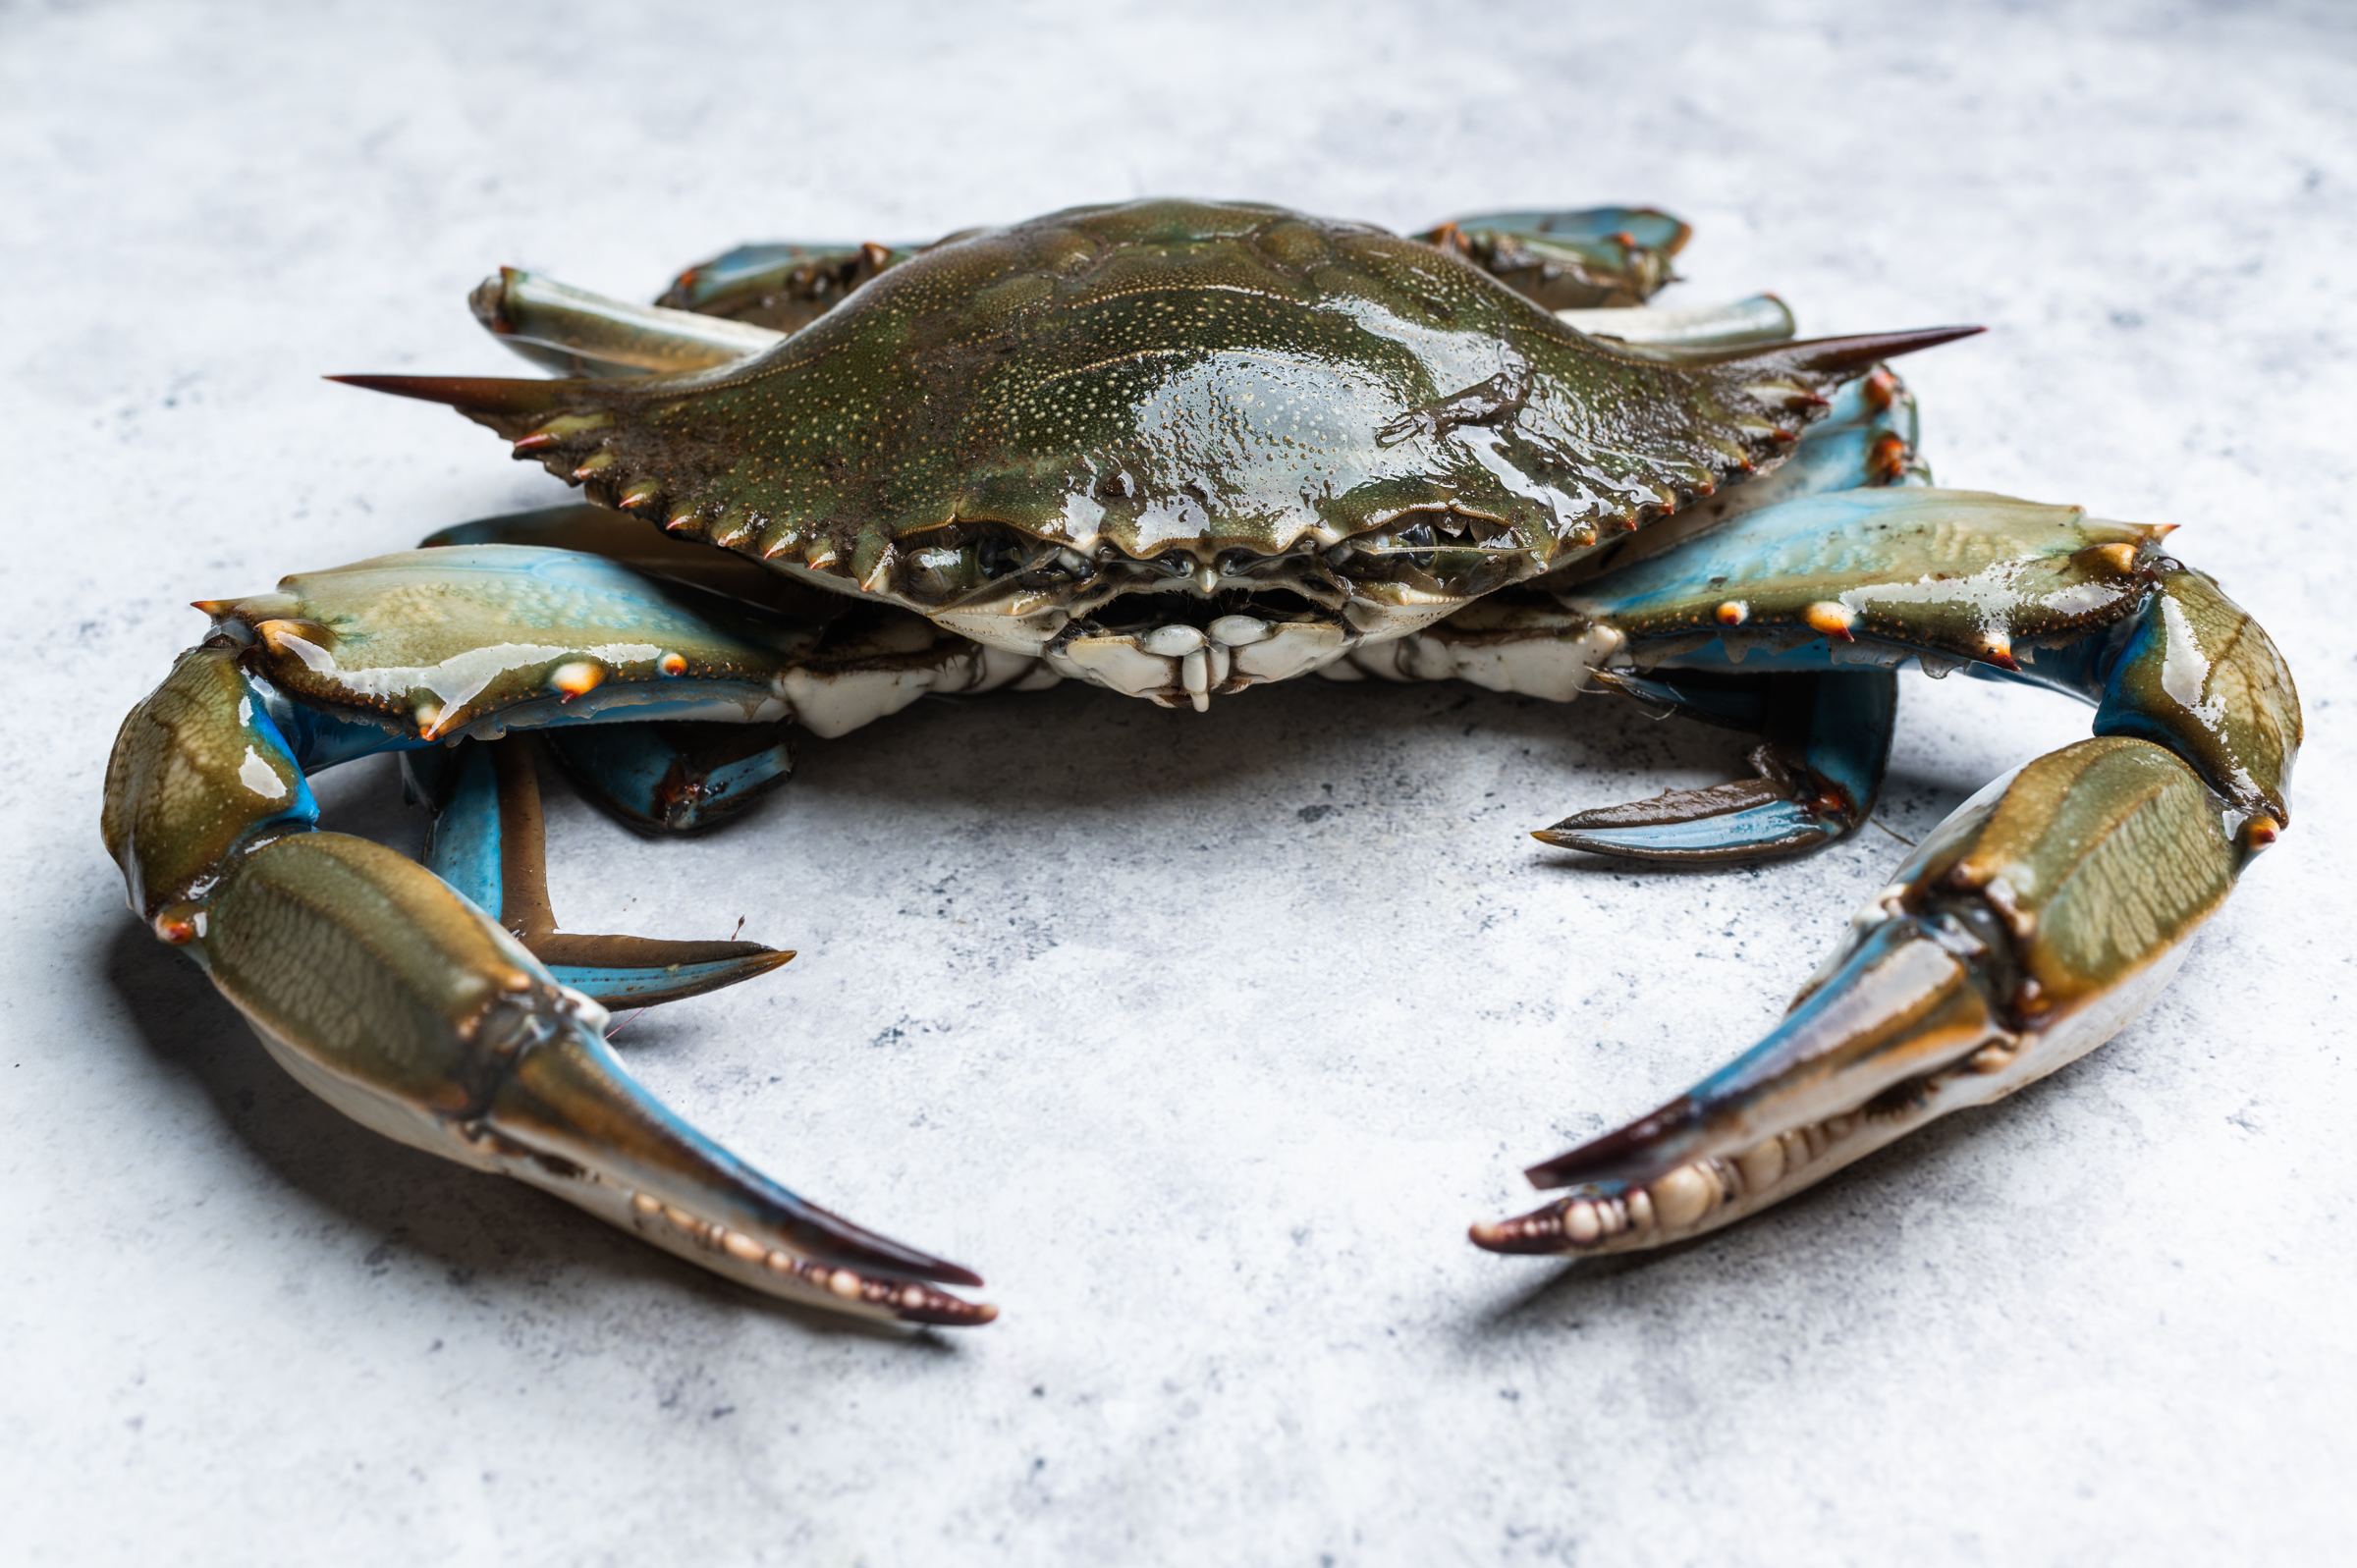 Male blue crabs can be identified by larger, blue-tipped claws